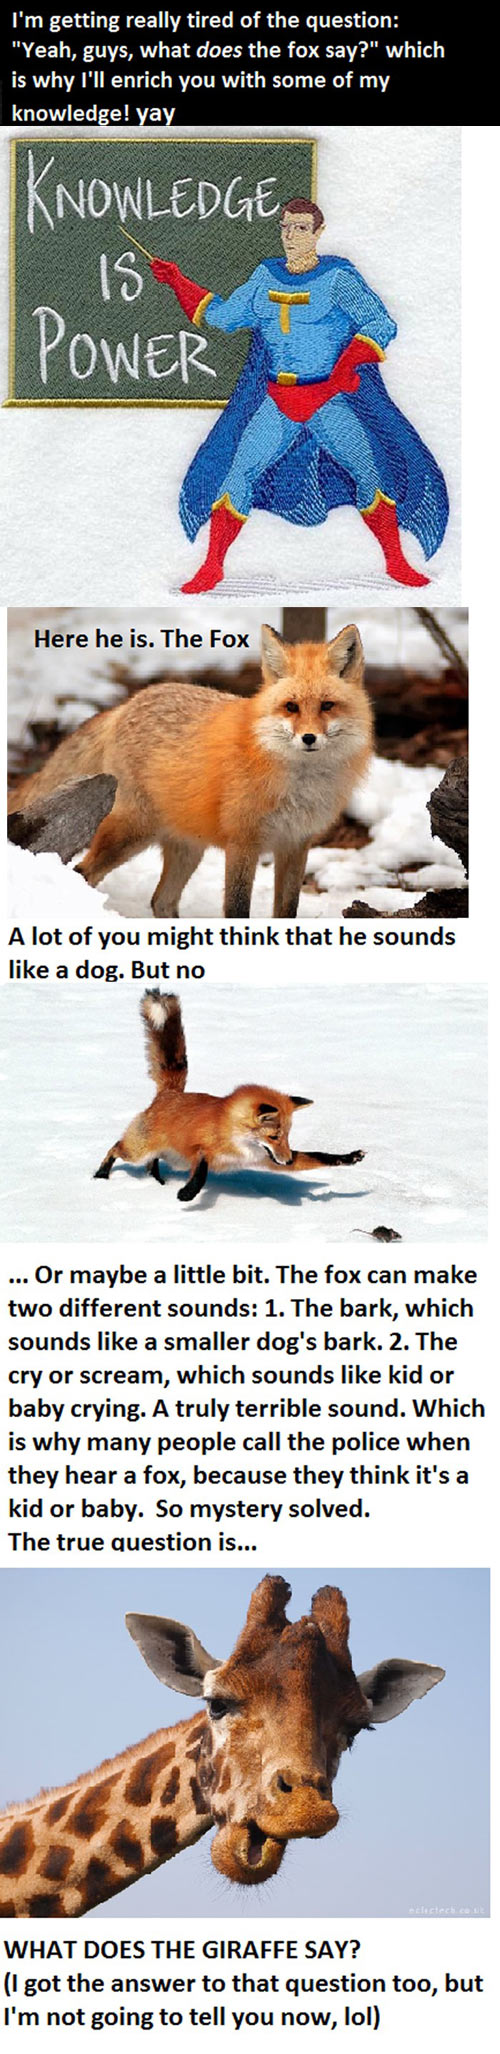 What the fox really says…